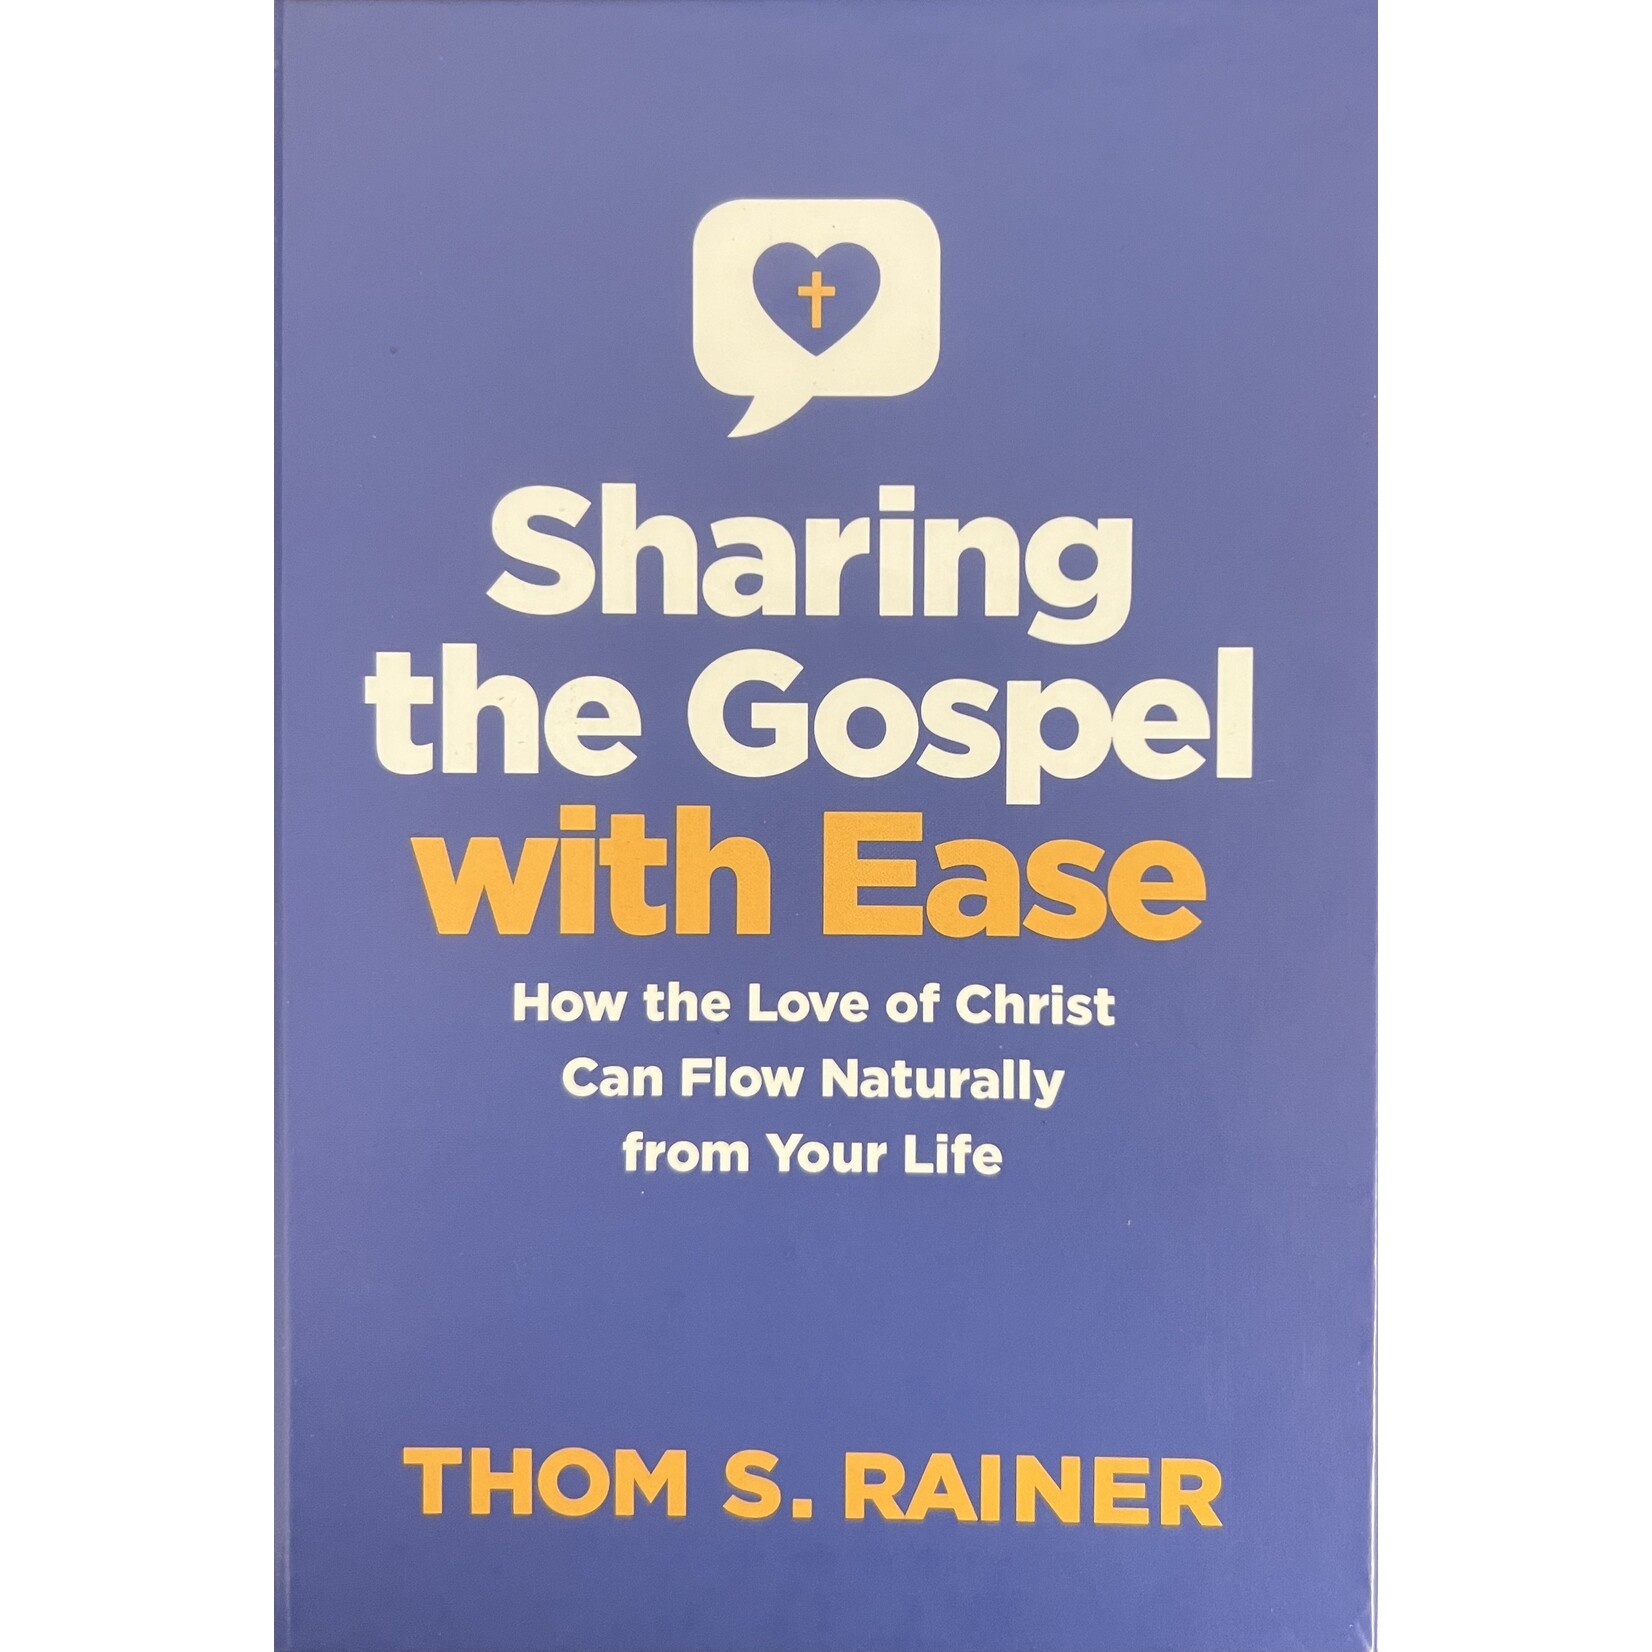 SHARING THE GOSPEL WITH EASE